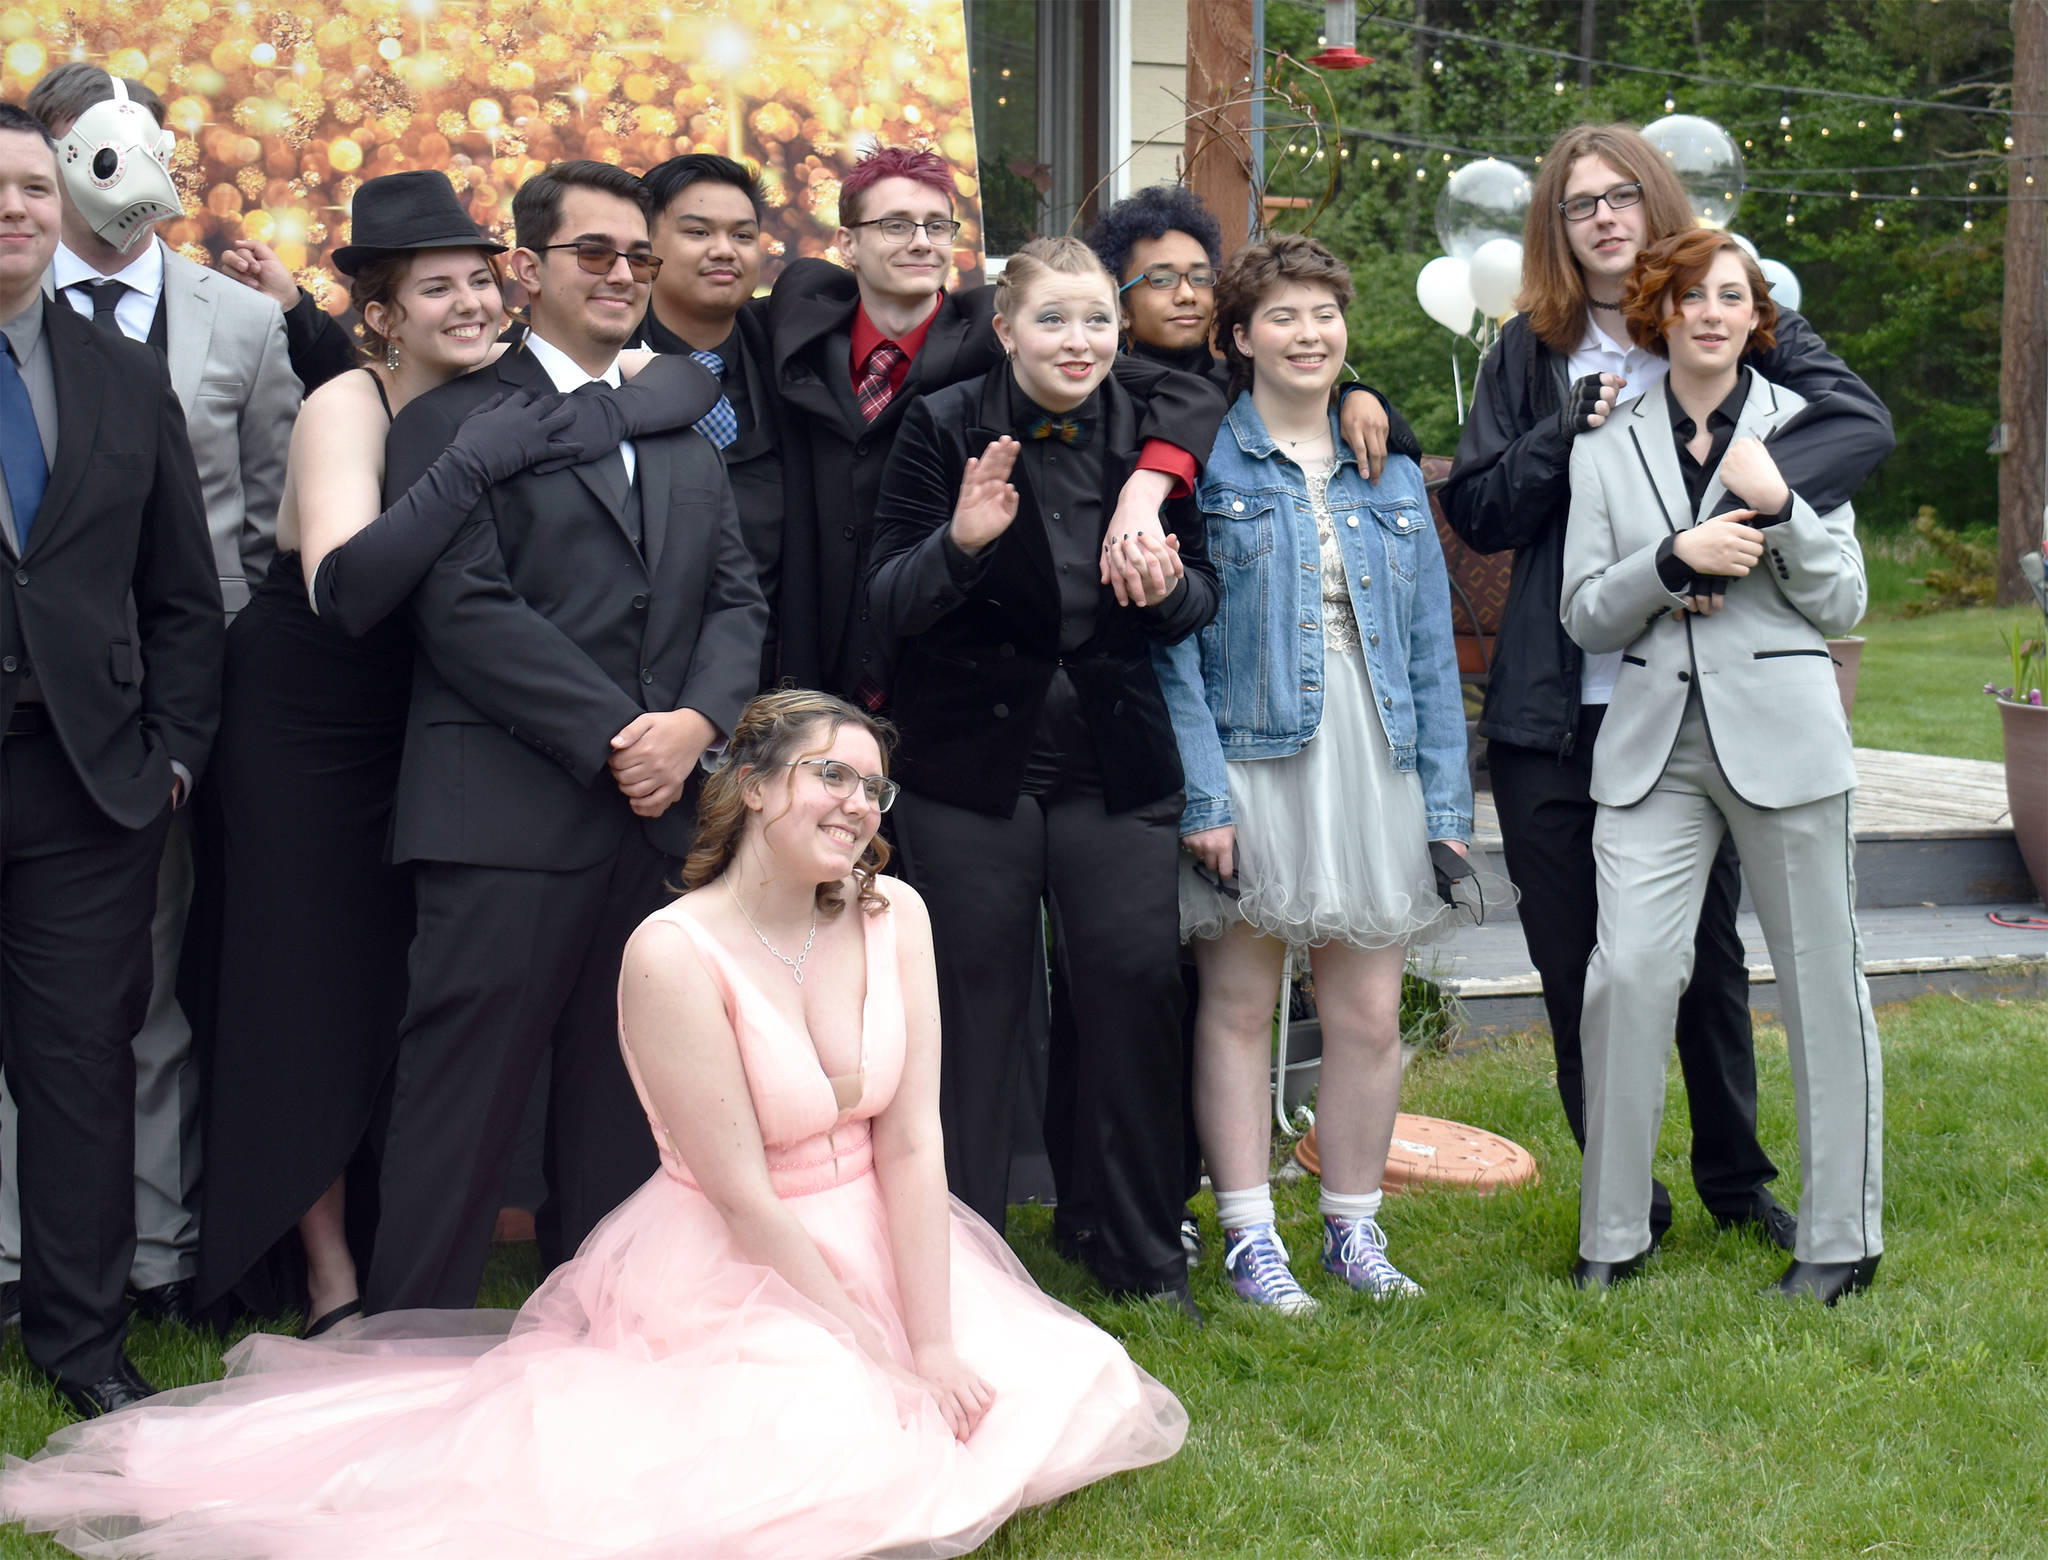 A group of Oak Harbor High School seniors got together last Saturday in a backyard to hold their own prom.